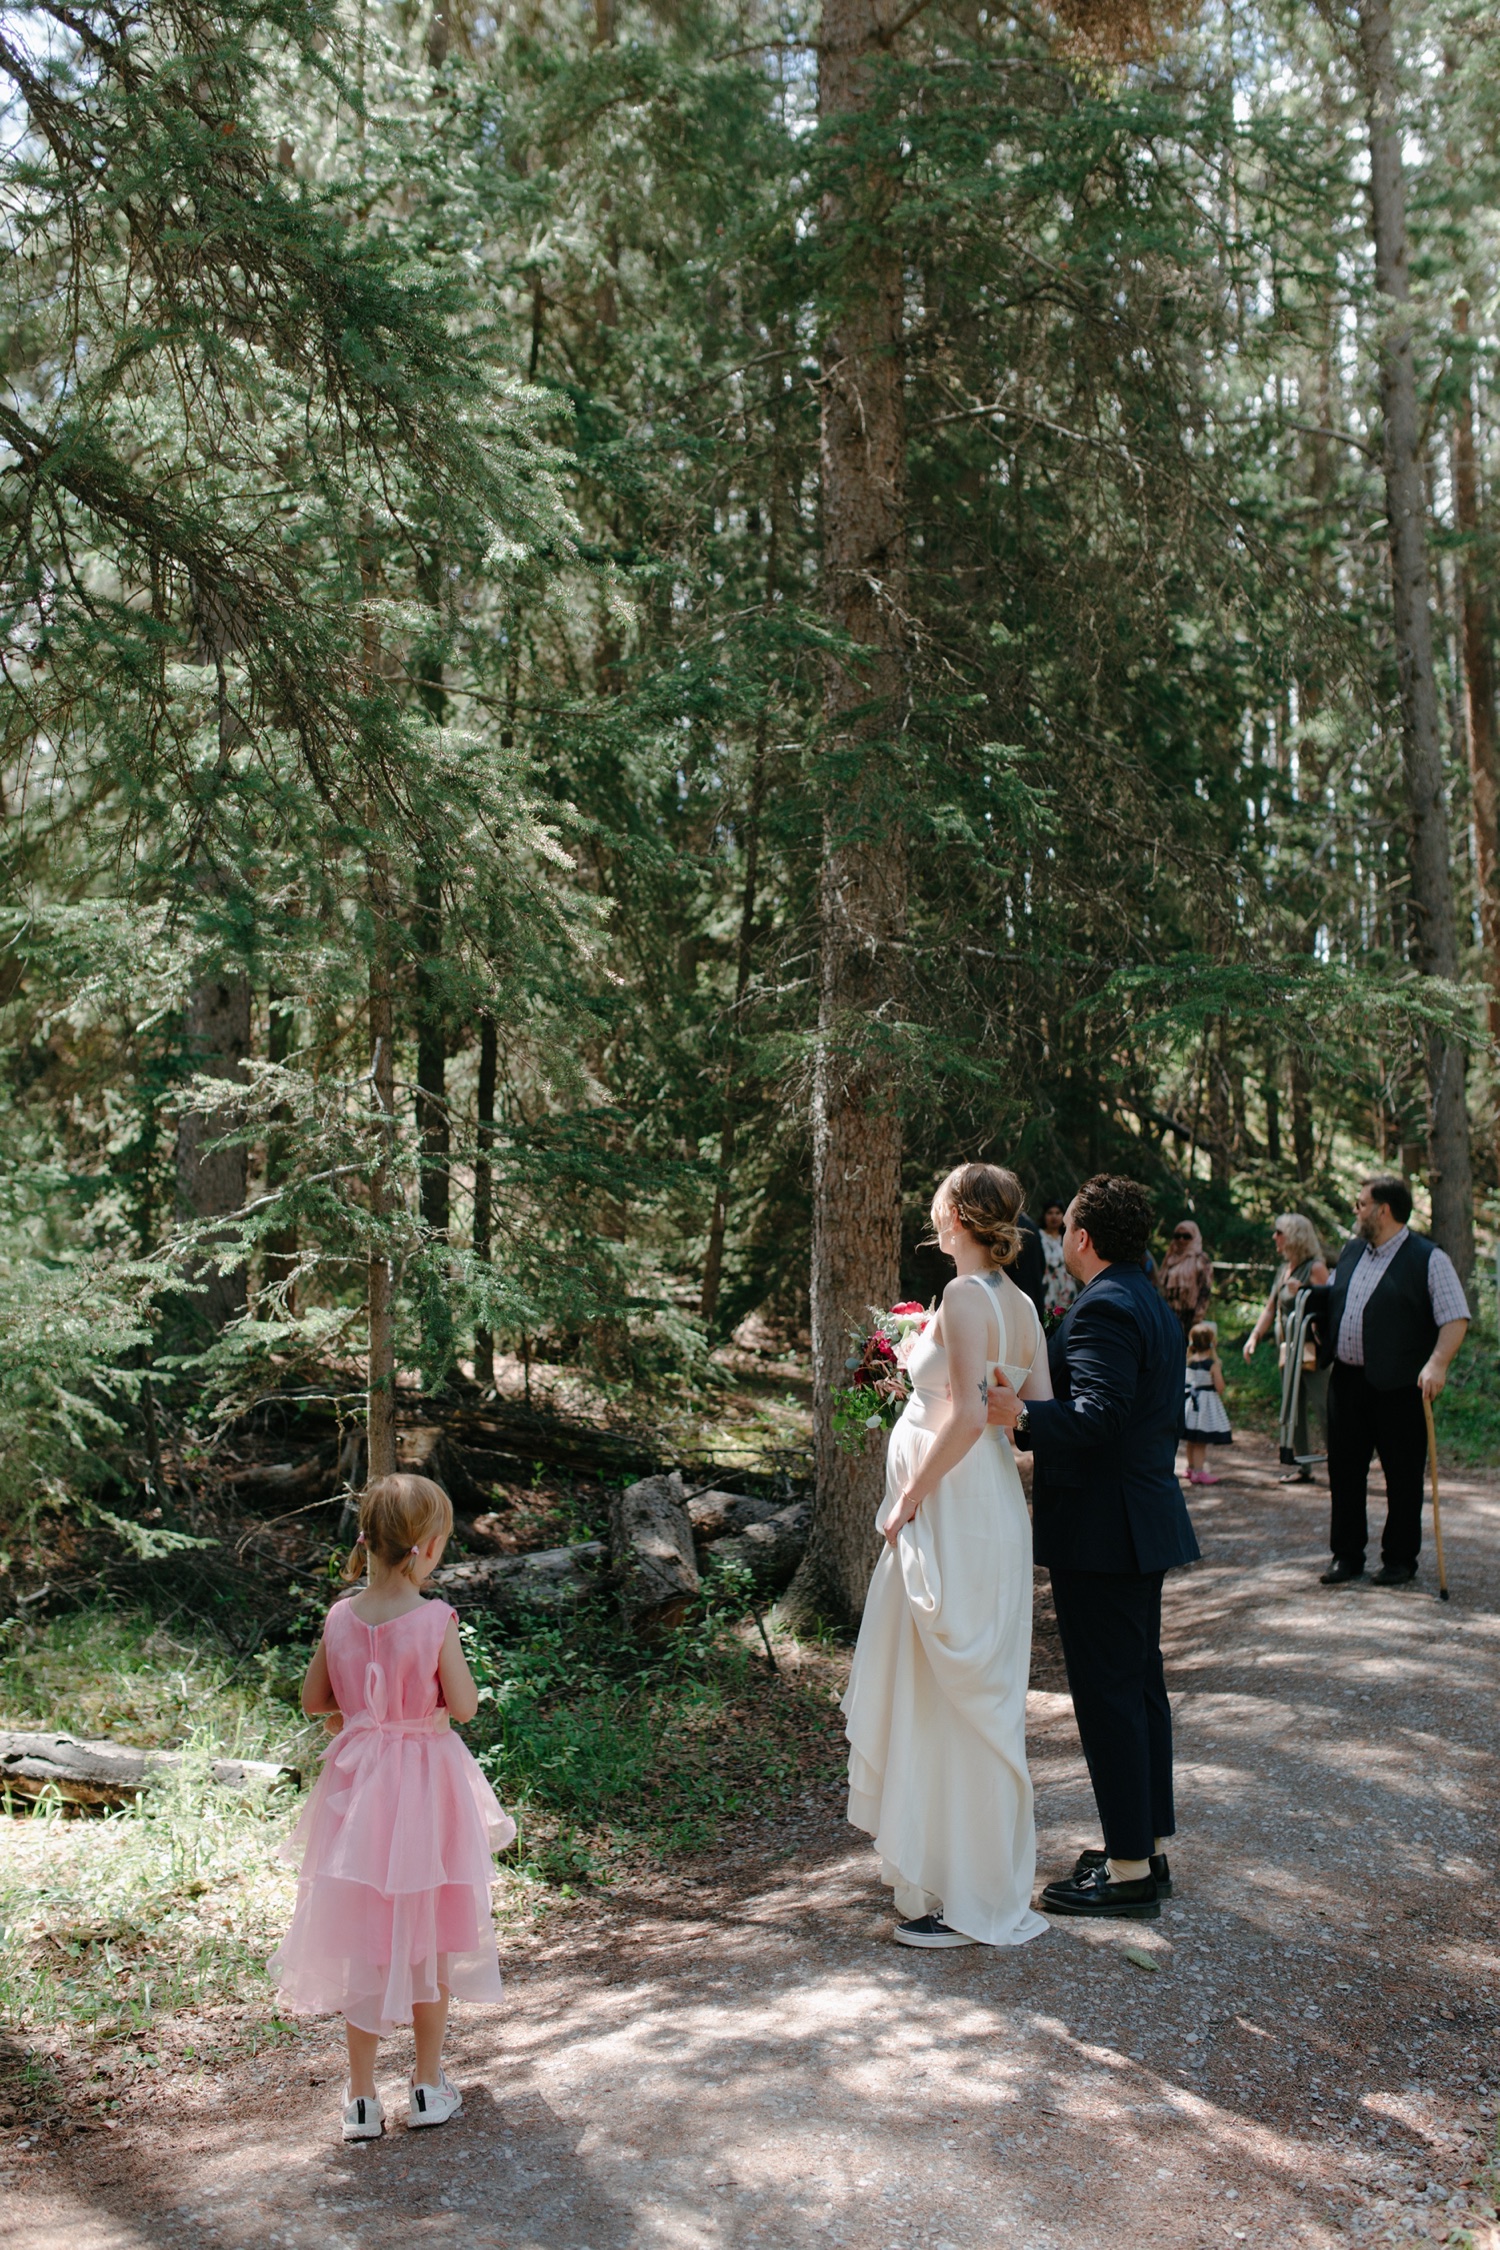 Couple embracing as they look back on a dappled lit forest path making sure their guests are managing the hike